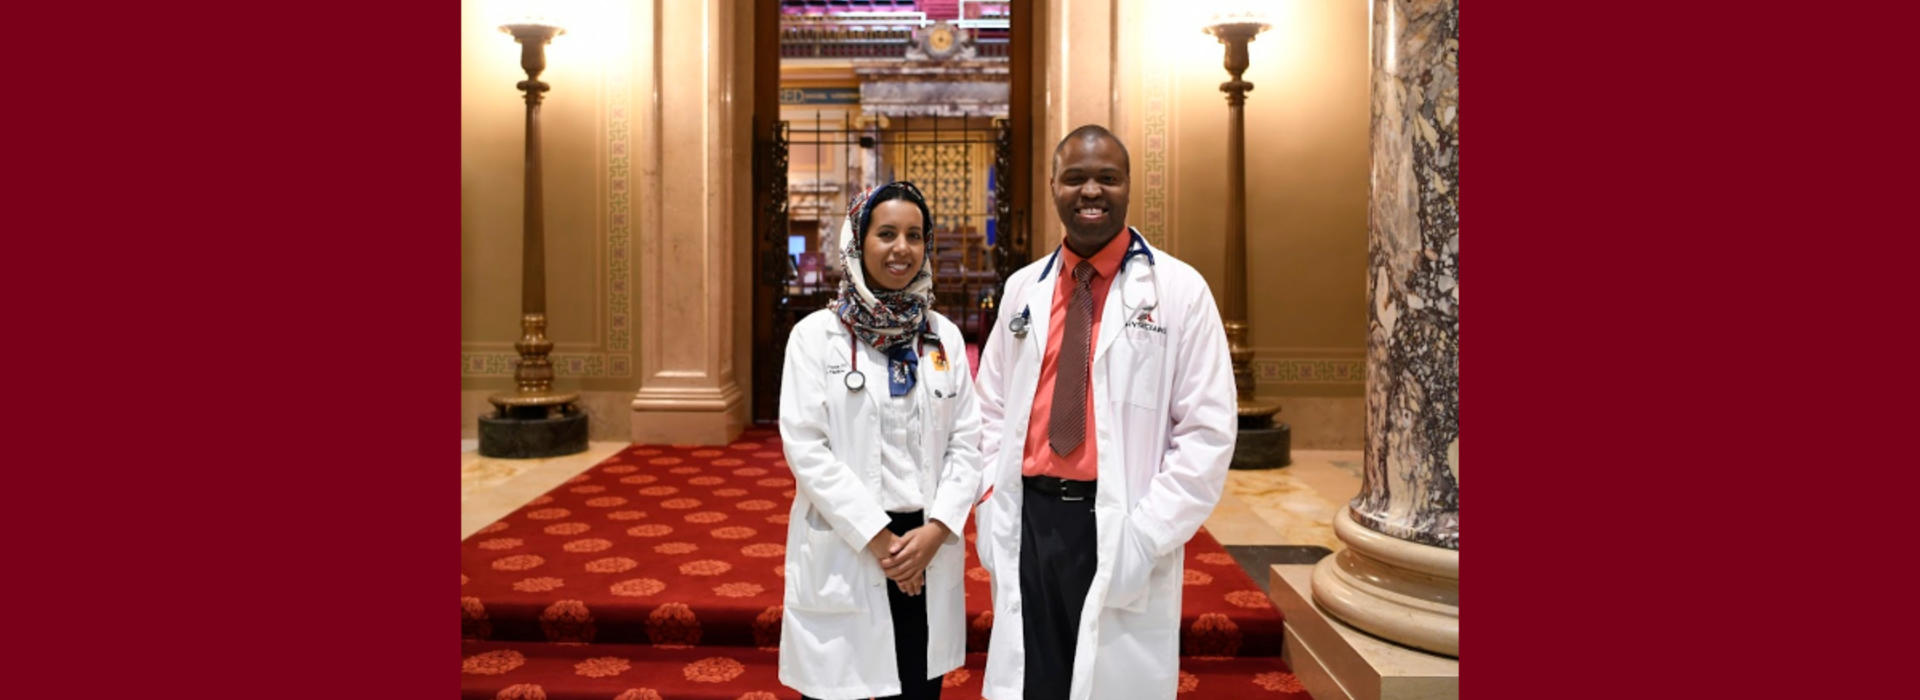 Najaha Musse, MD, resident, and Lonzale Ramsey, MD, faculty